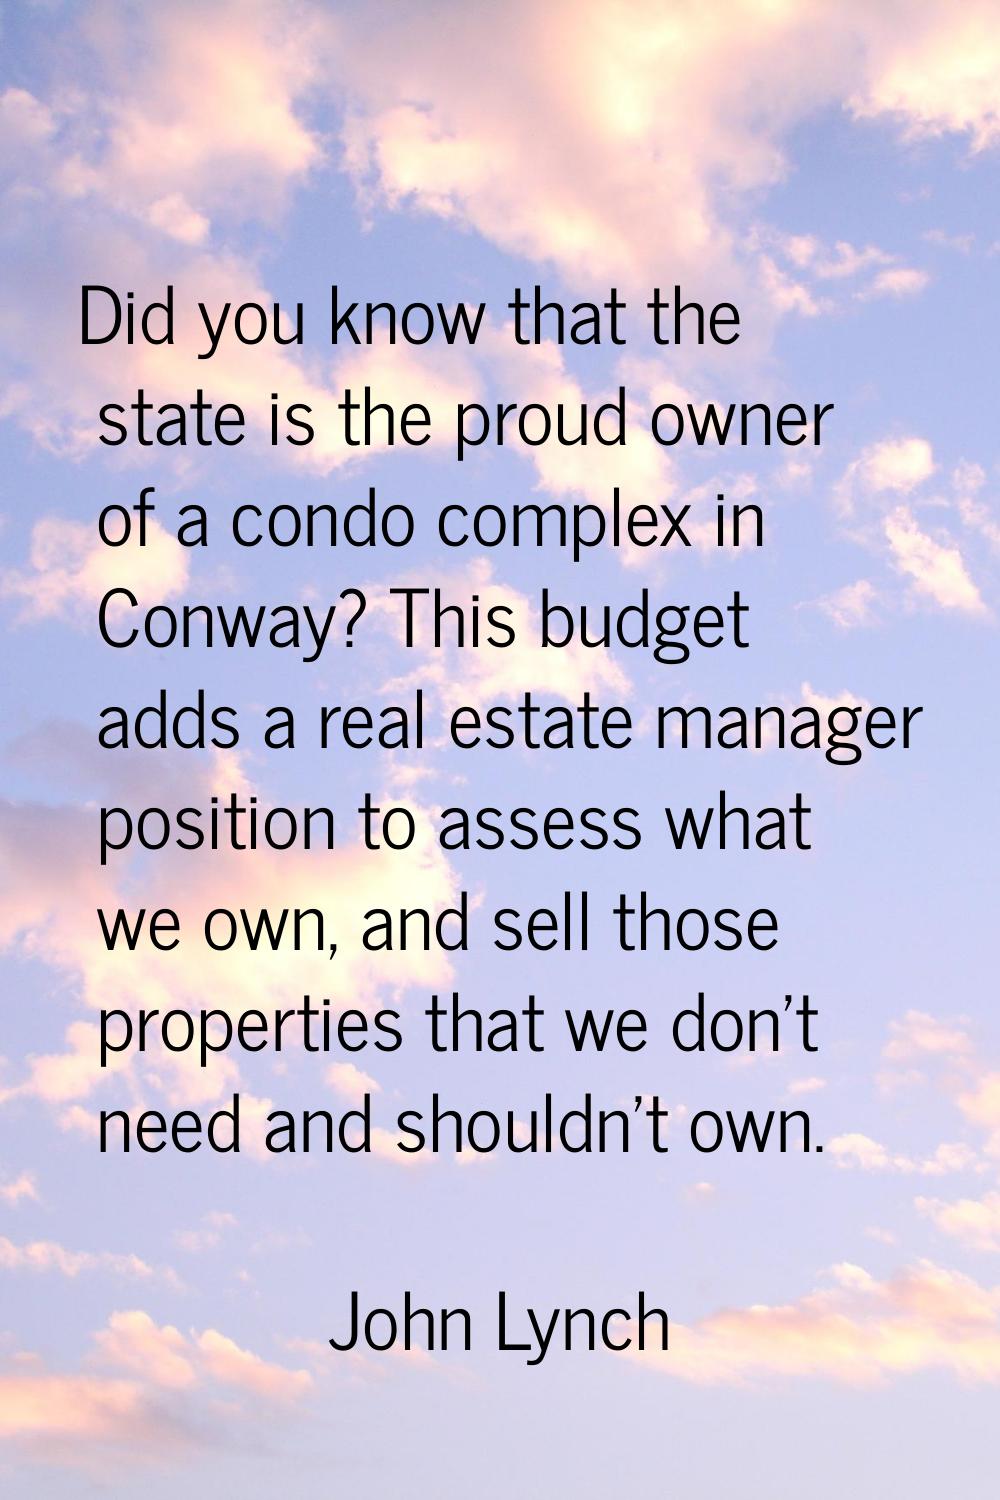 Did you know that the state is the proud owner of a condo complex in Conway? This budget adds a rea